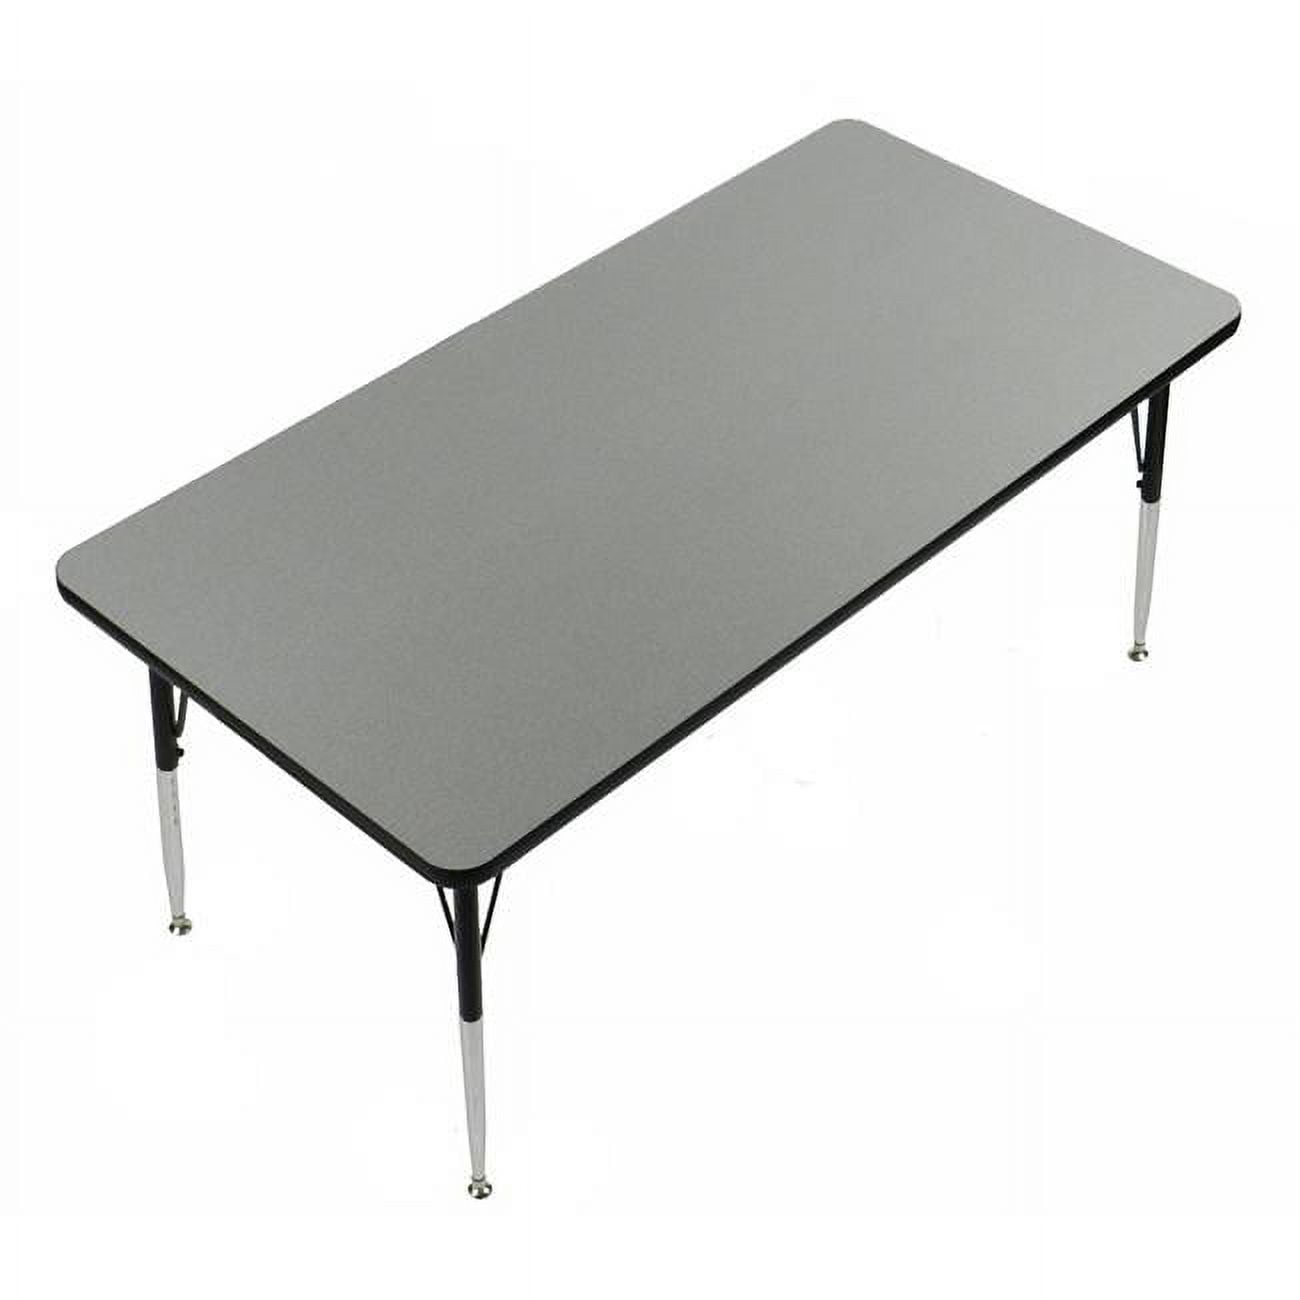 Picture of Correll A2448-TRP-55 1.25 in. High Pressure Top Trapezoid Activity Tables, Montana Granite - 24 x 48 in.